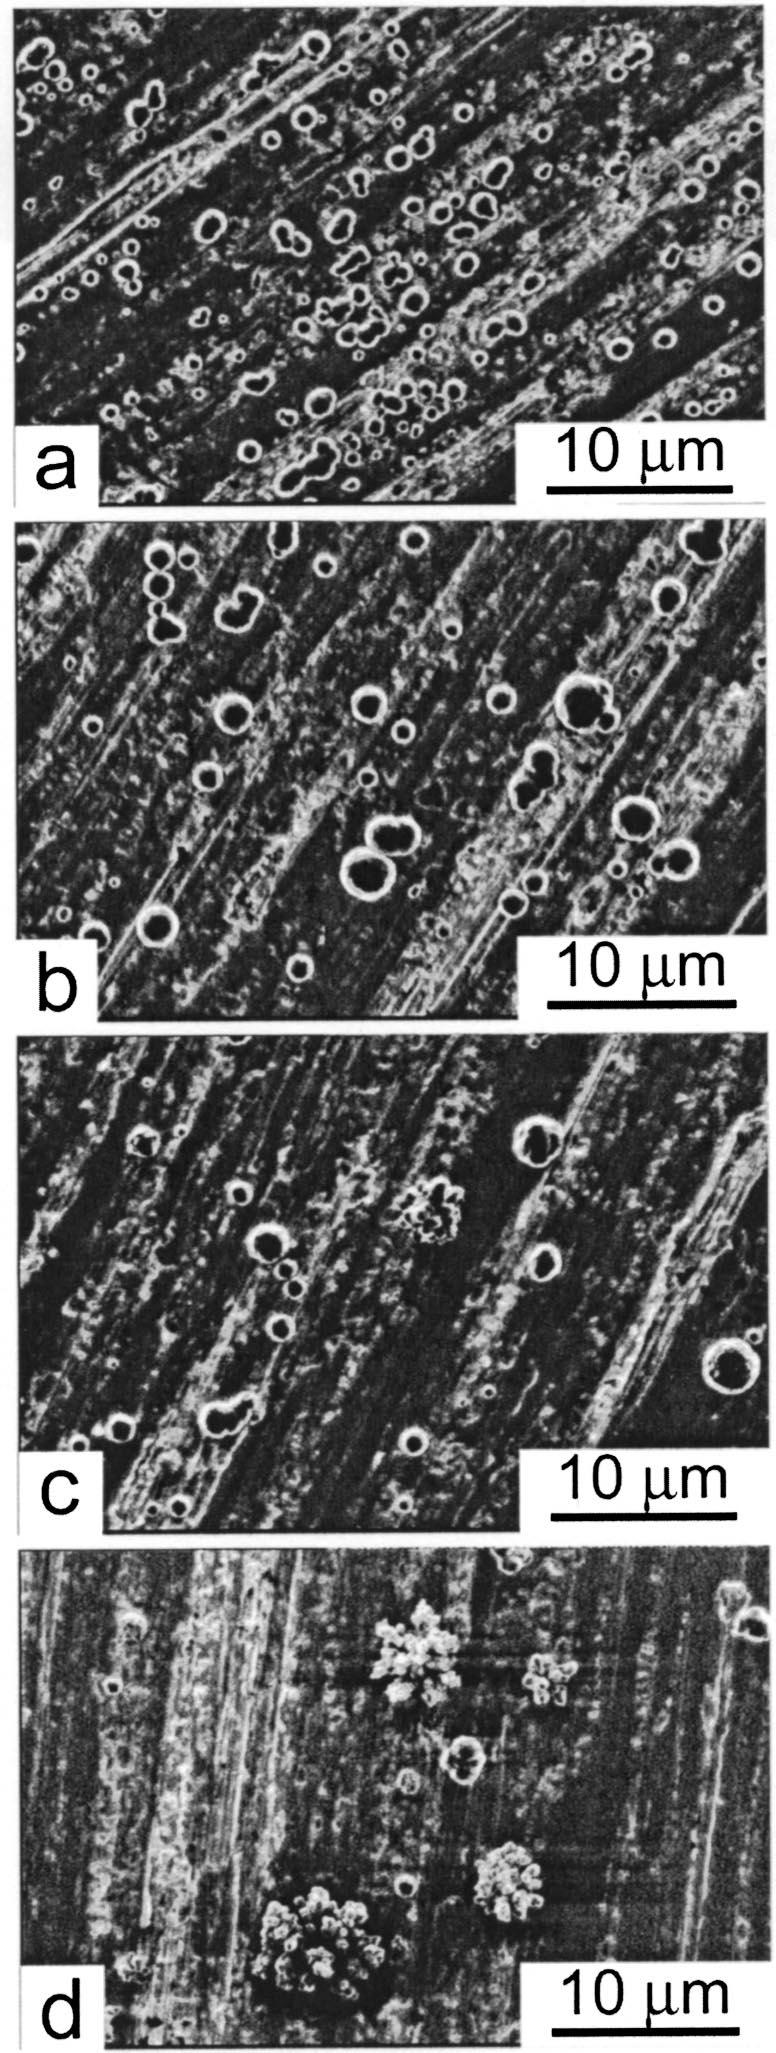 Journal of The Electrochemical Society, 151 6 C369-C374 2004 C373 Figure 13. Logarithm of copper island density vs. oxide thickness for copper deposited at 3 macm 2 for 30 s 150 equivalent monolayers.